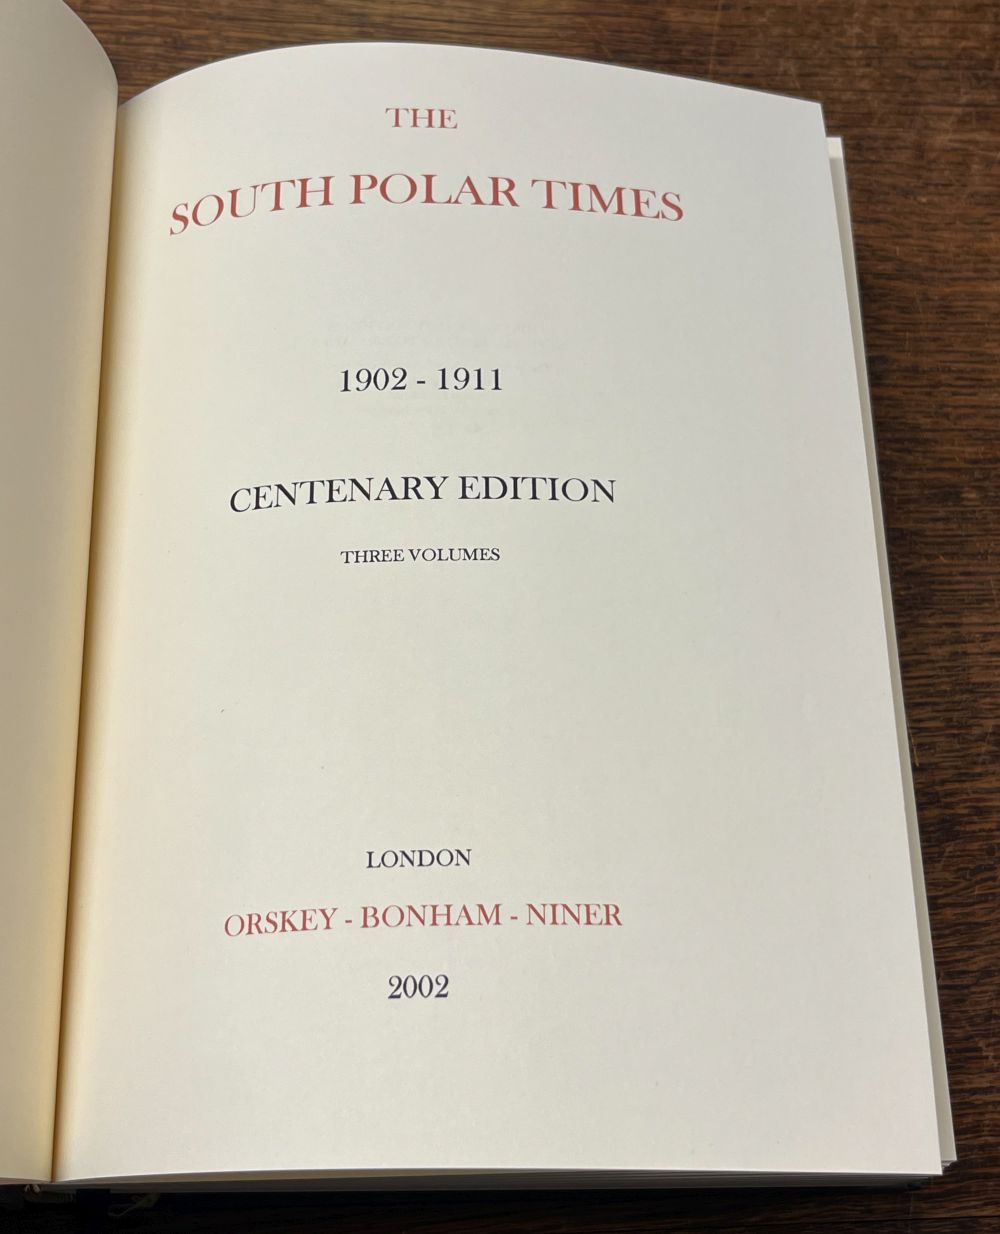 South Polar Times. The South Polar Times, 3 volumes, Centenary Edition, 2002 - Image 11 of 13